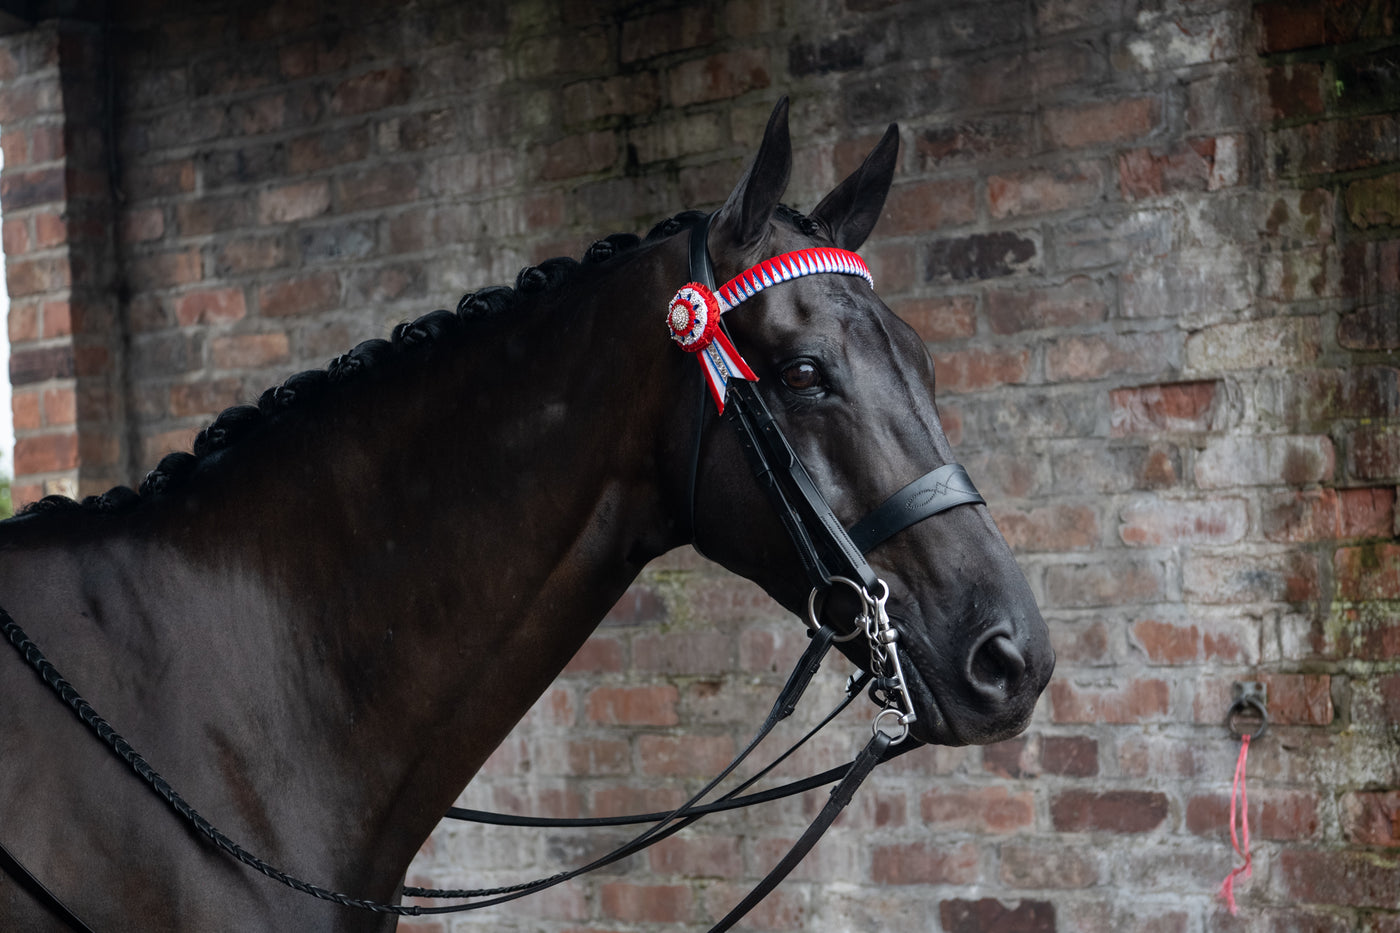 Products to enhance and perfect equestrian turnout.